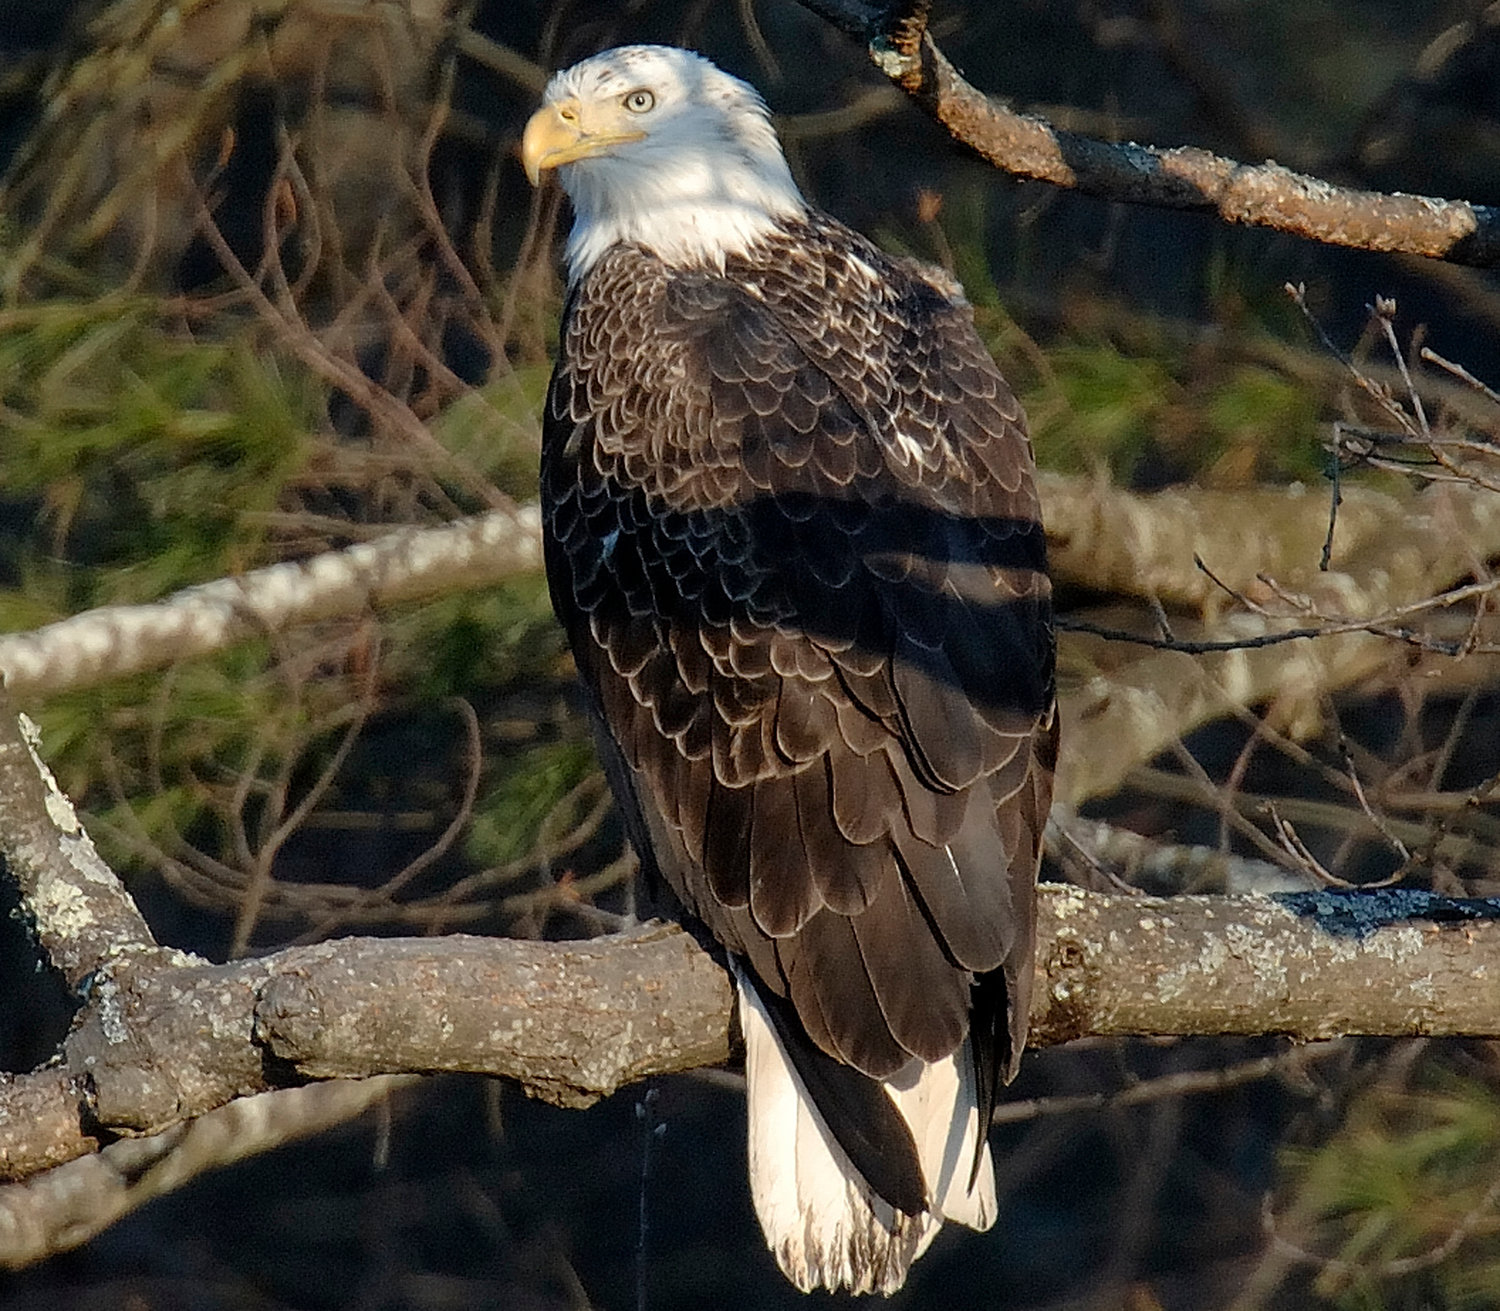 After 4-5 years, eagles become adults and will seek a mate and a territory. Immediately before this, they are considered subadults and have plumage with light streaks in the brown or dark streaks in the white. This subadult shows just a hint of dark streaking on the head and the end of the tail as well as light speckling on the back. Subadults are frequently seen as part of breeding pairs...